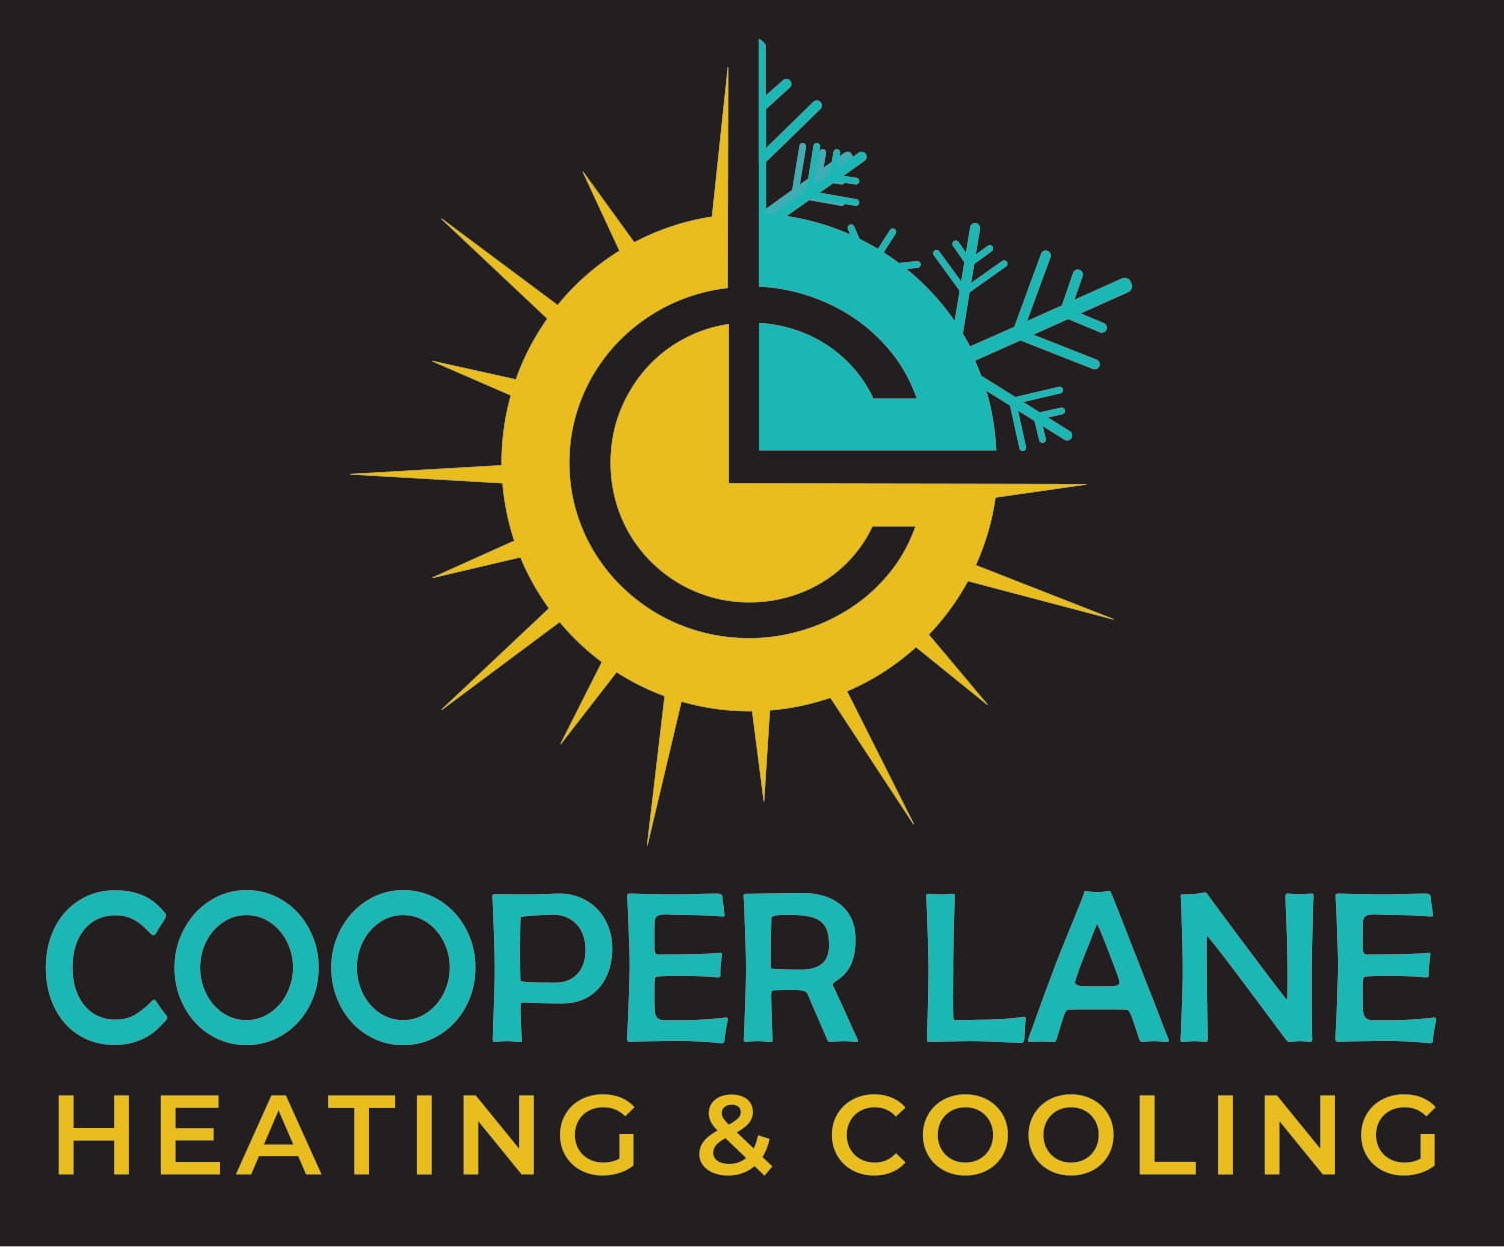 Cooper Lane Heating & Cooling 28 Parlowtown Rd, Marion Massachusetts 02738